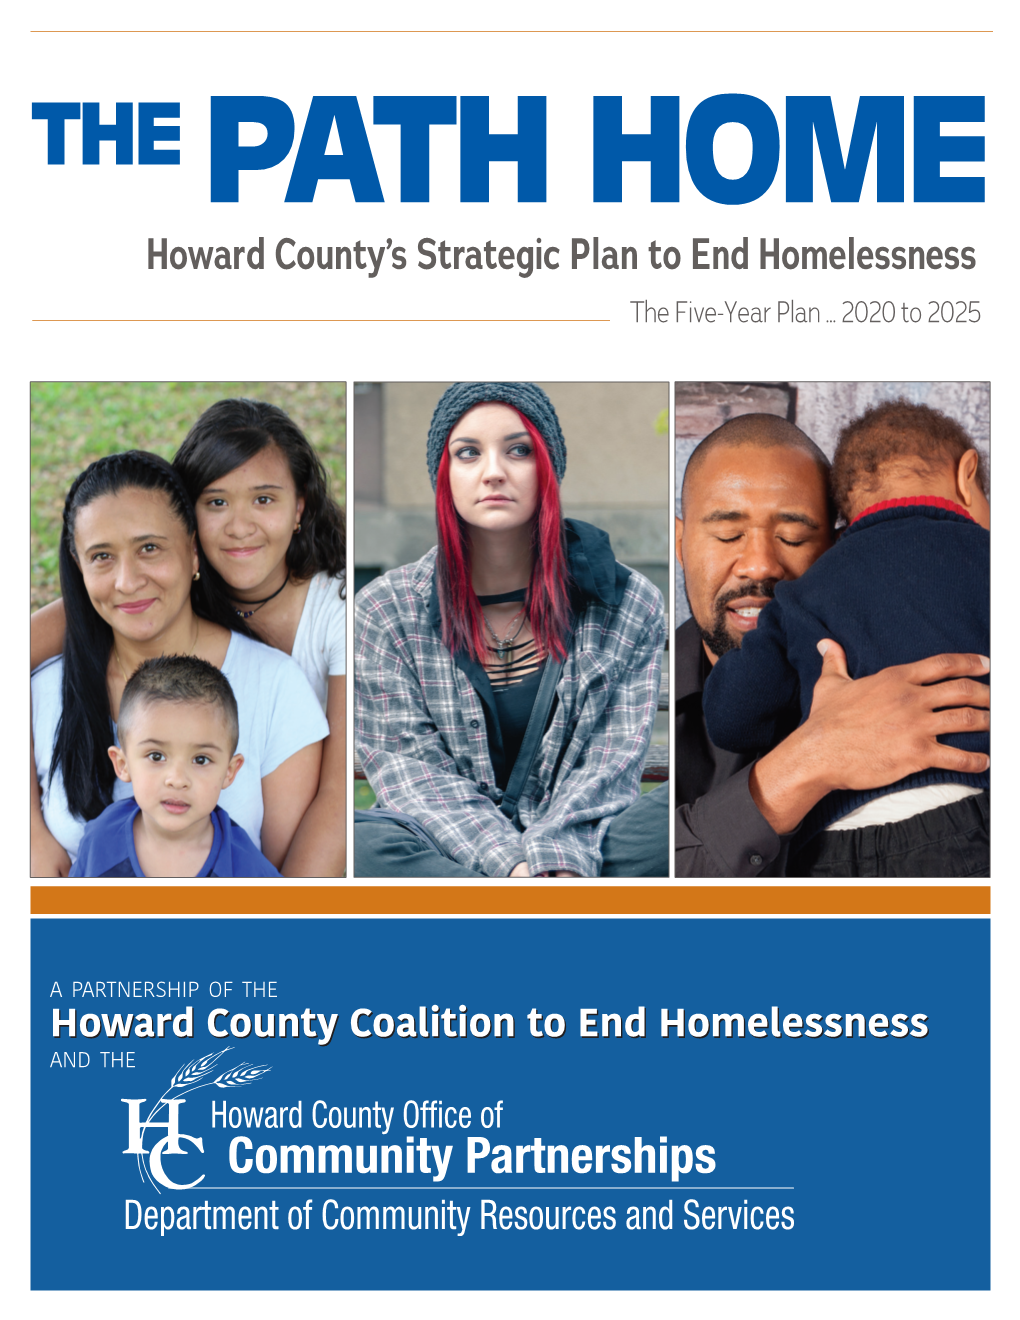 Howard County's Strategic Plan to End Homelessness